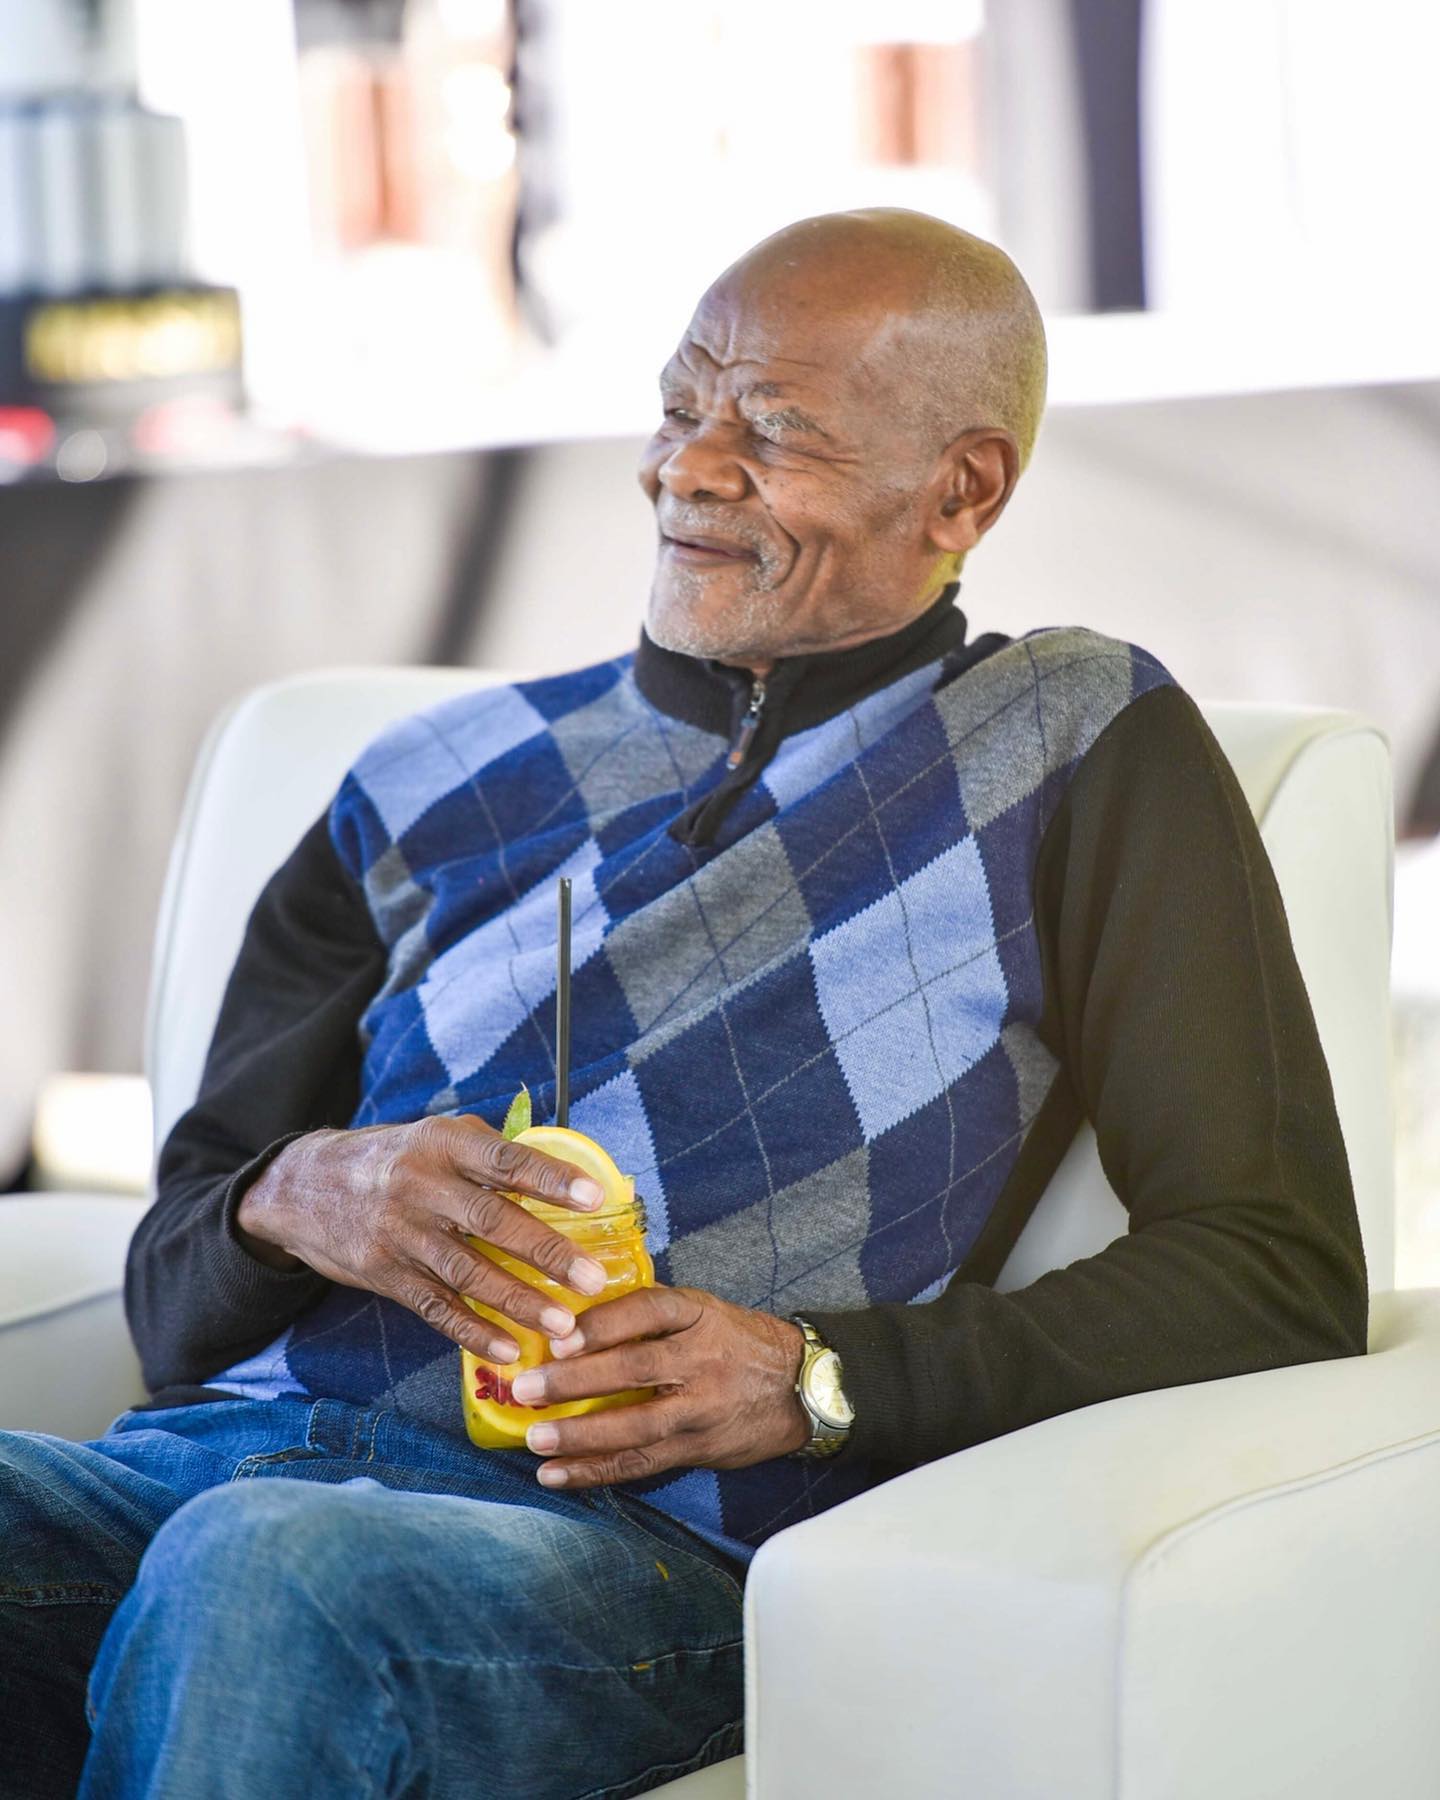 Connie Ferguson's sweetest message to her father on his 88th birthday